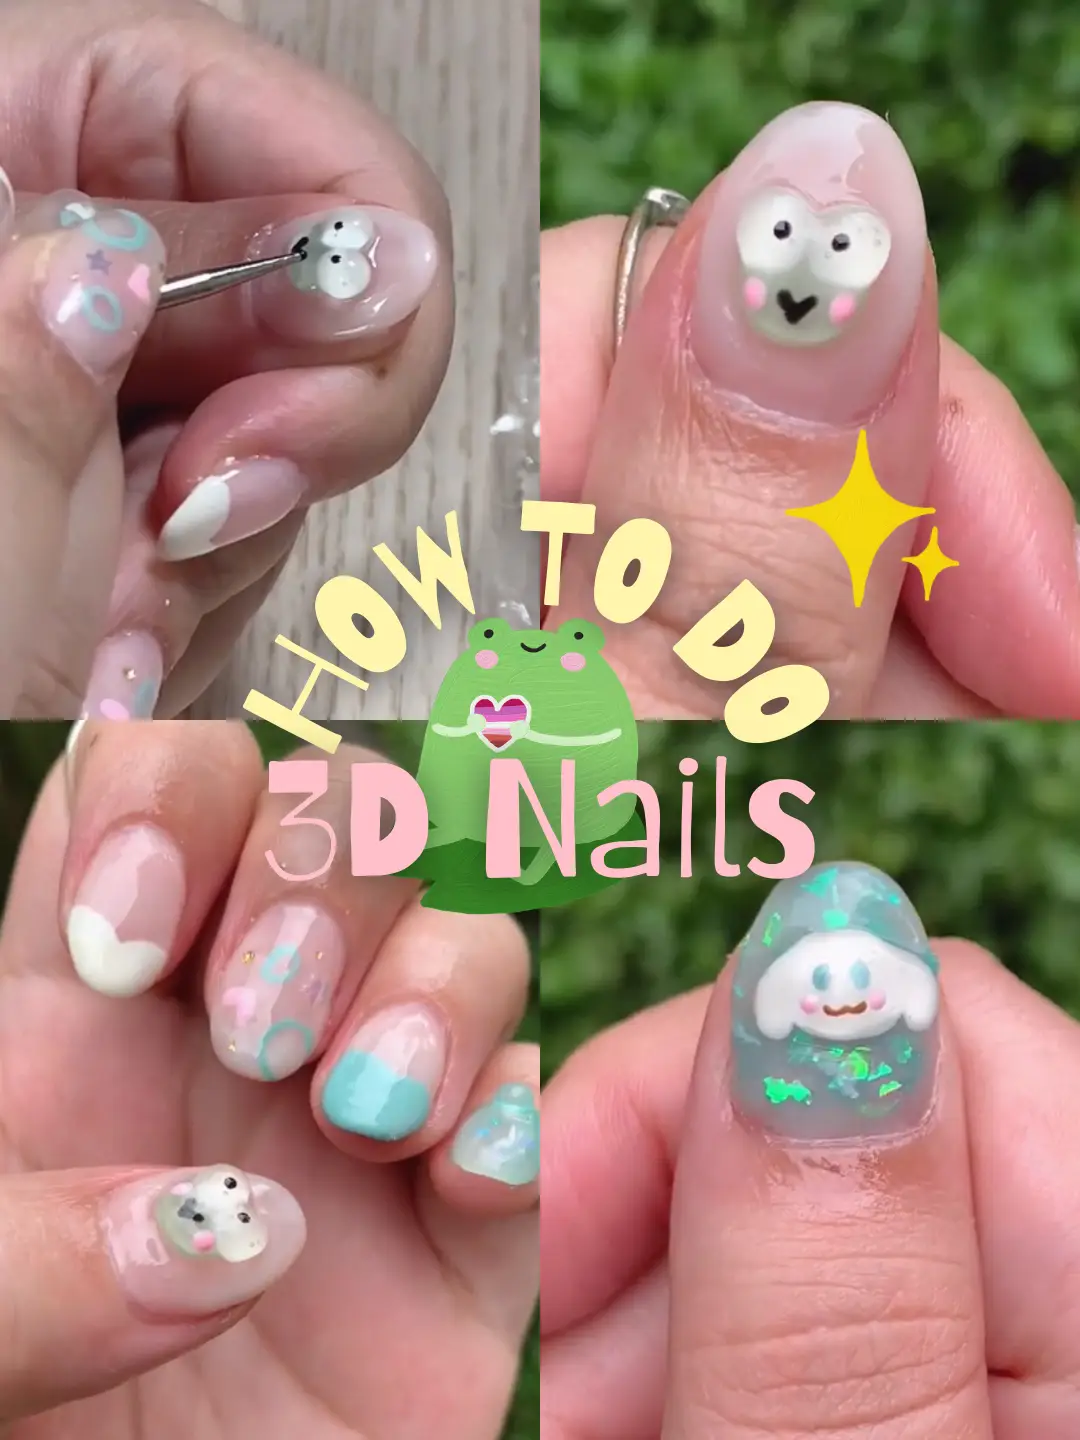 how to do 3D nails ✨, Video published by farah